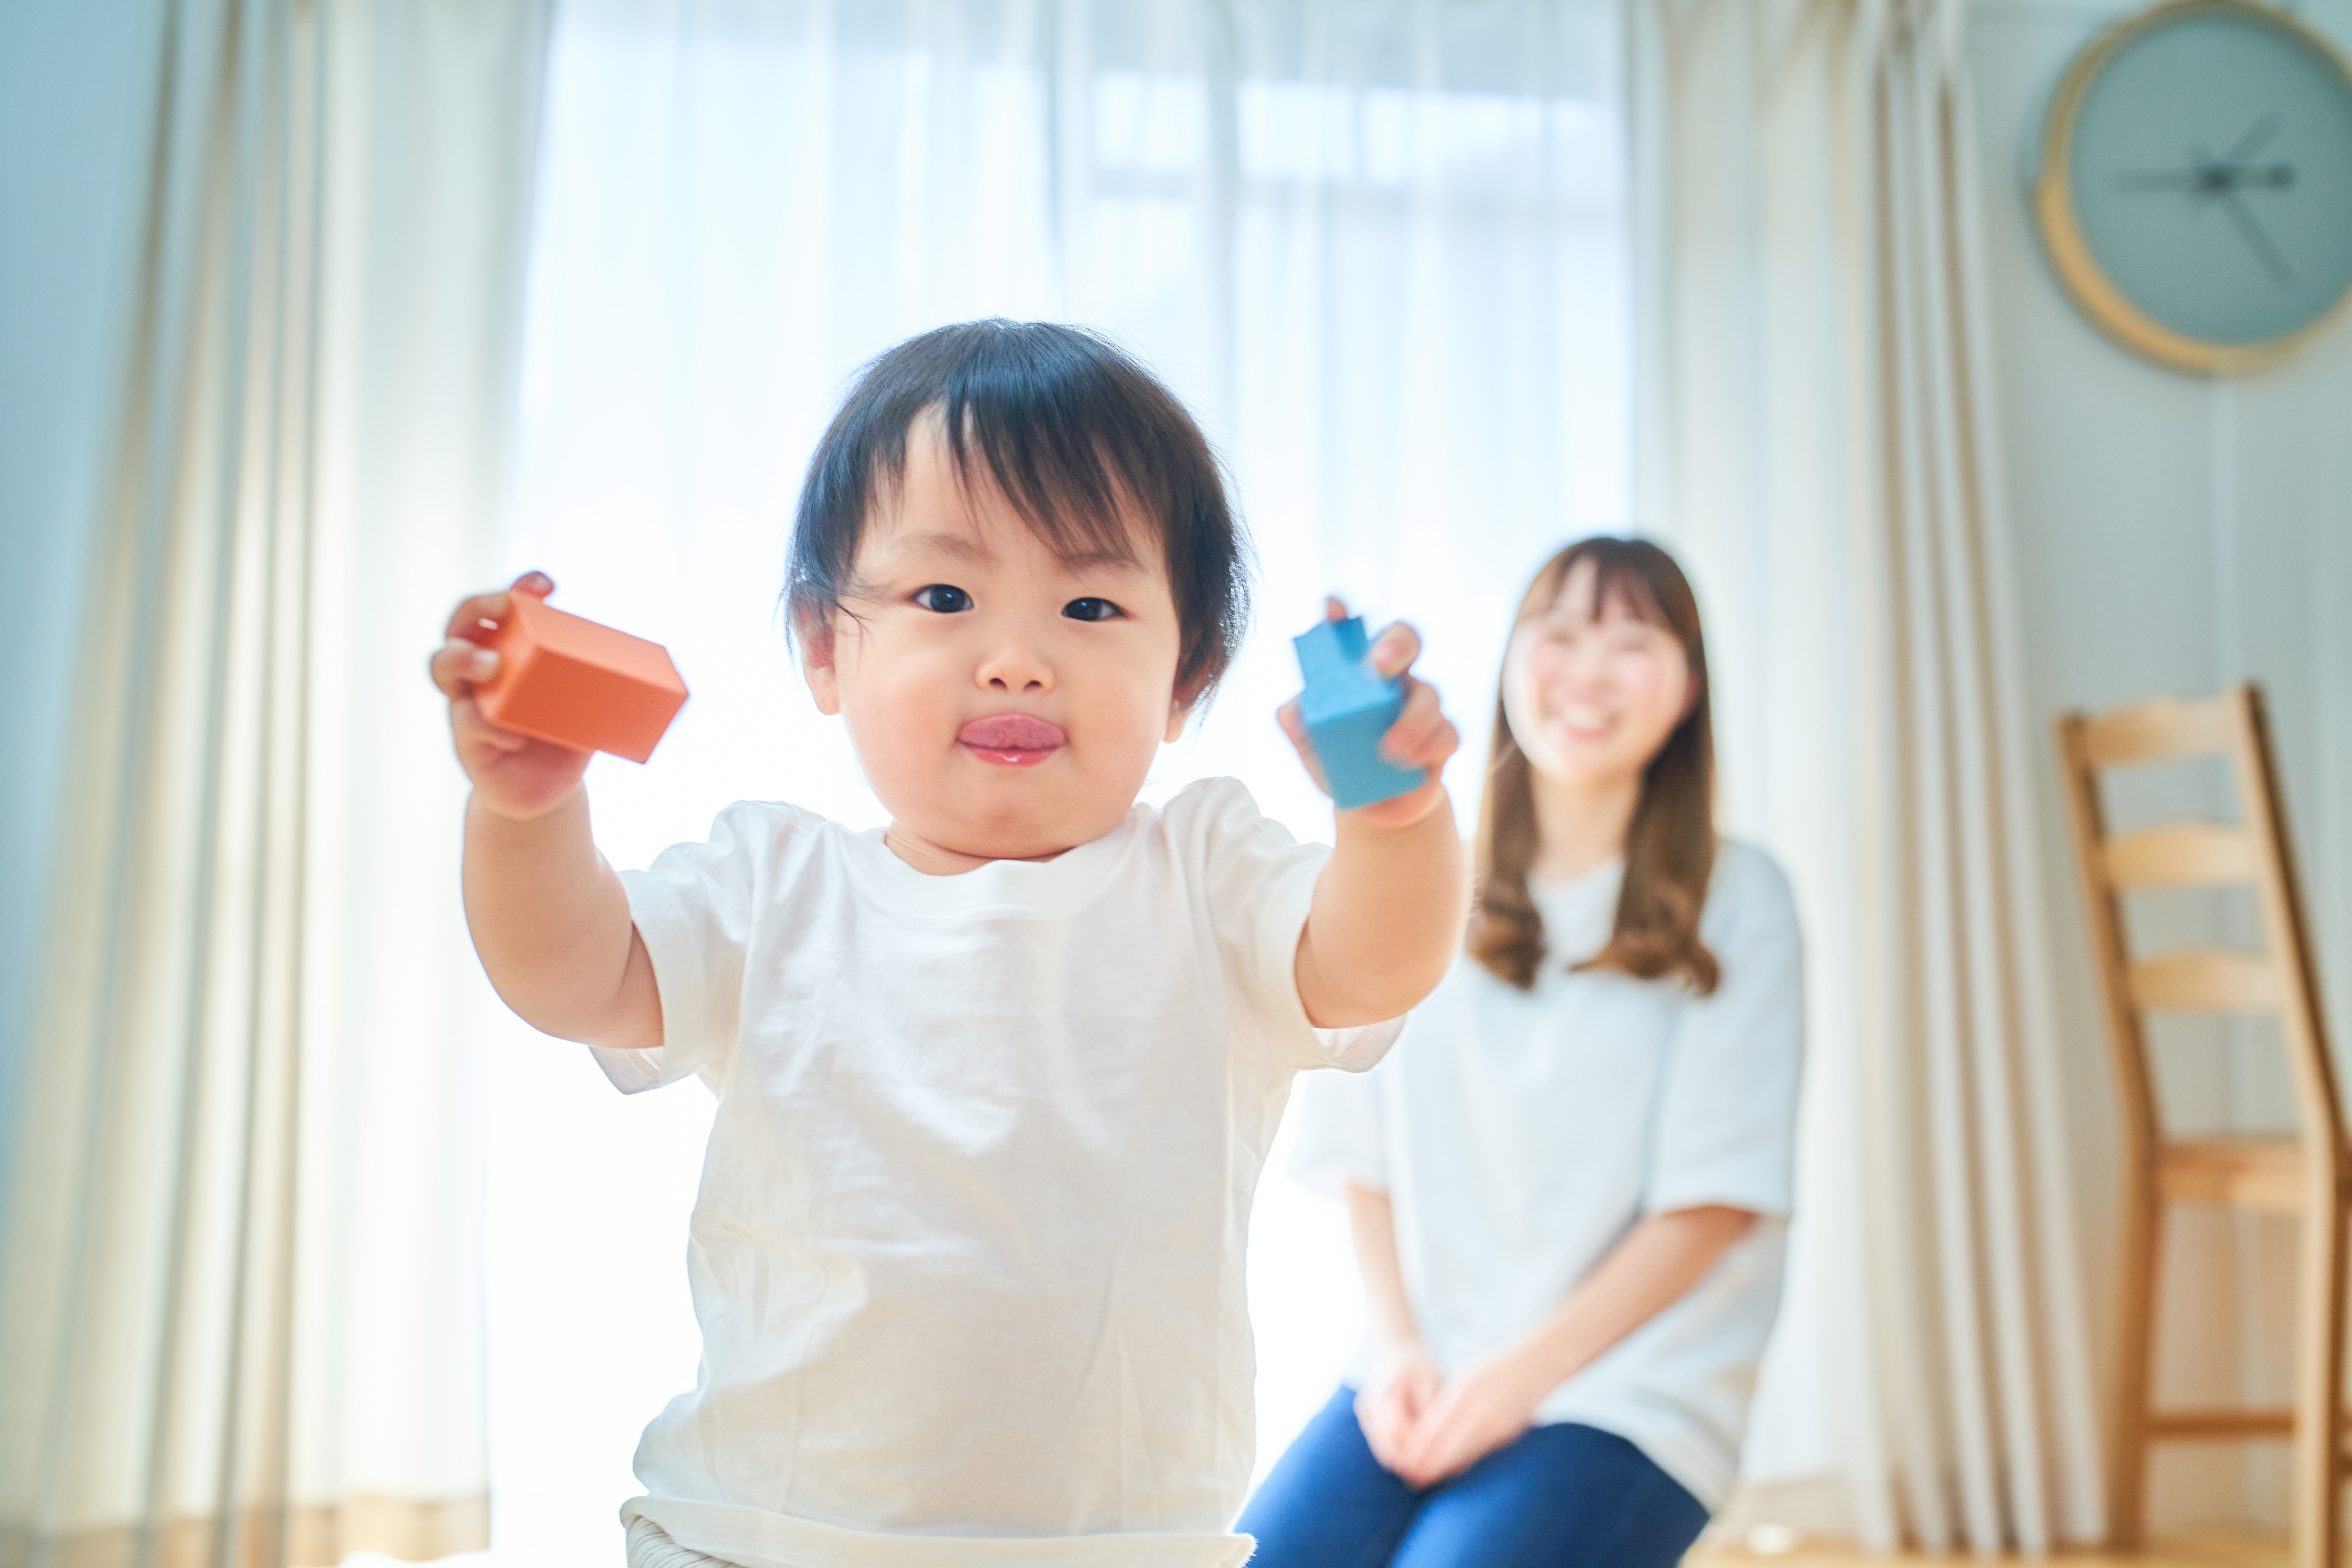 Toddler holding toys with smiling woman seated in the background